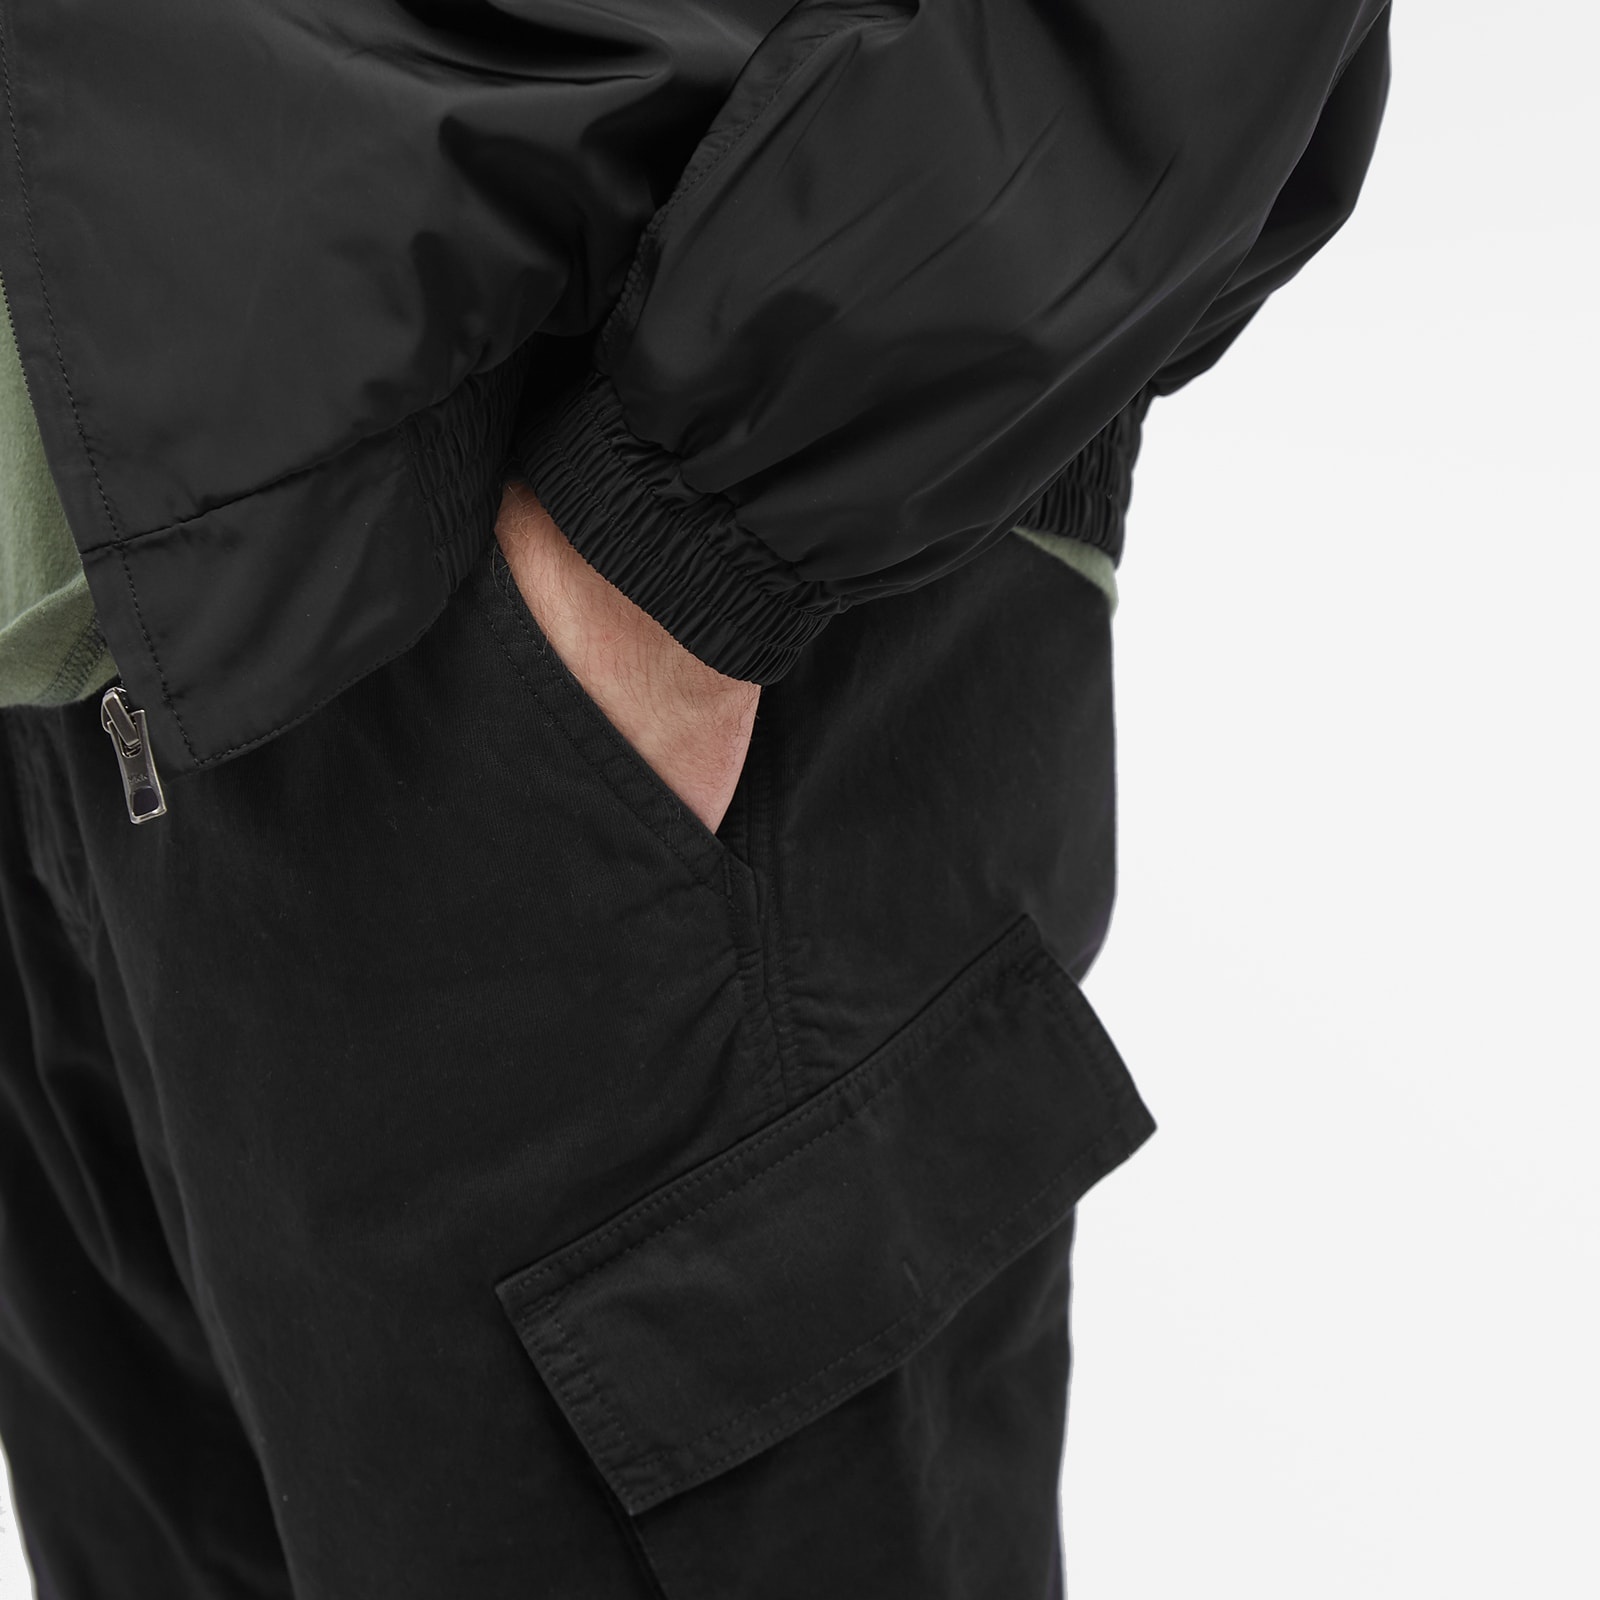 Nonnative Overdyed 6 Pocket Soldier Pants - 5